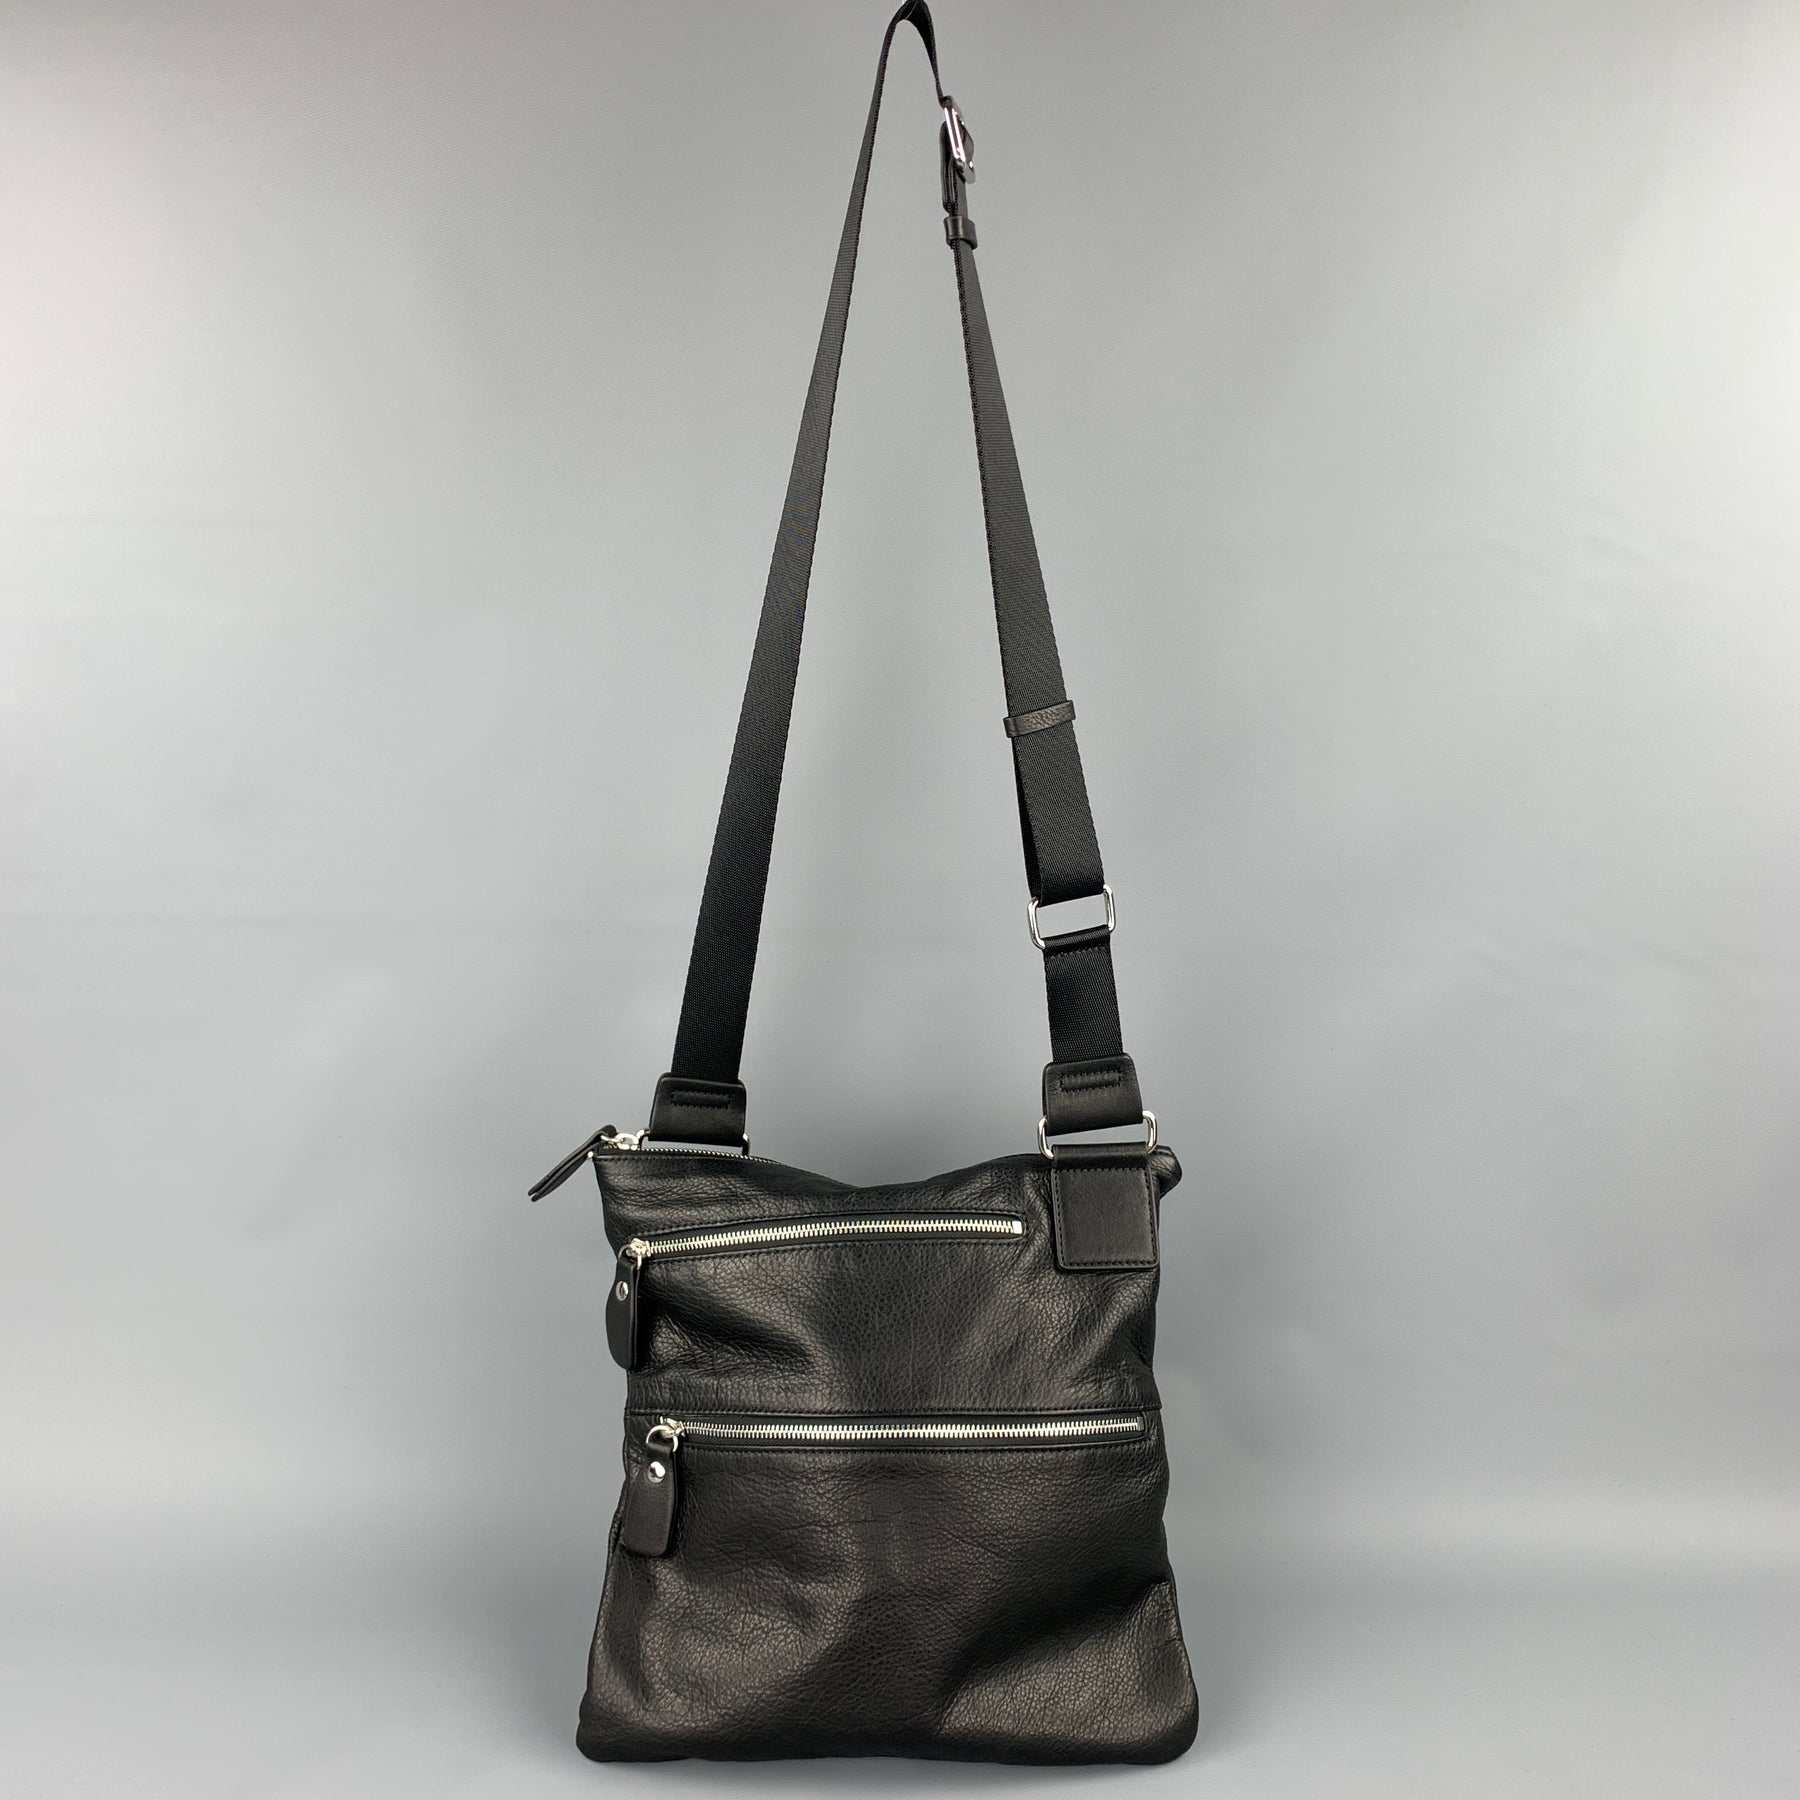 Sold at Auction: MARGOT BLACK LEATHER MOTO STYLE CROSSBODY PURSE